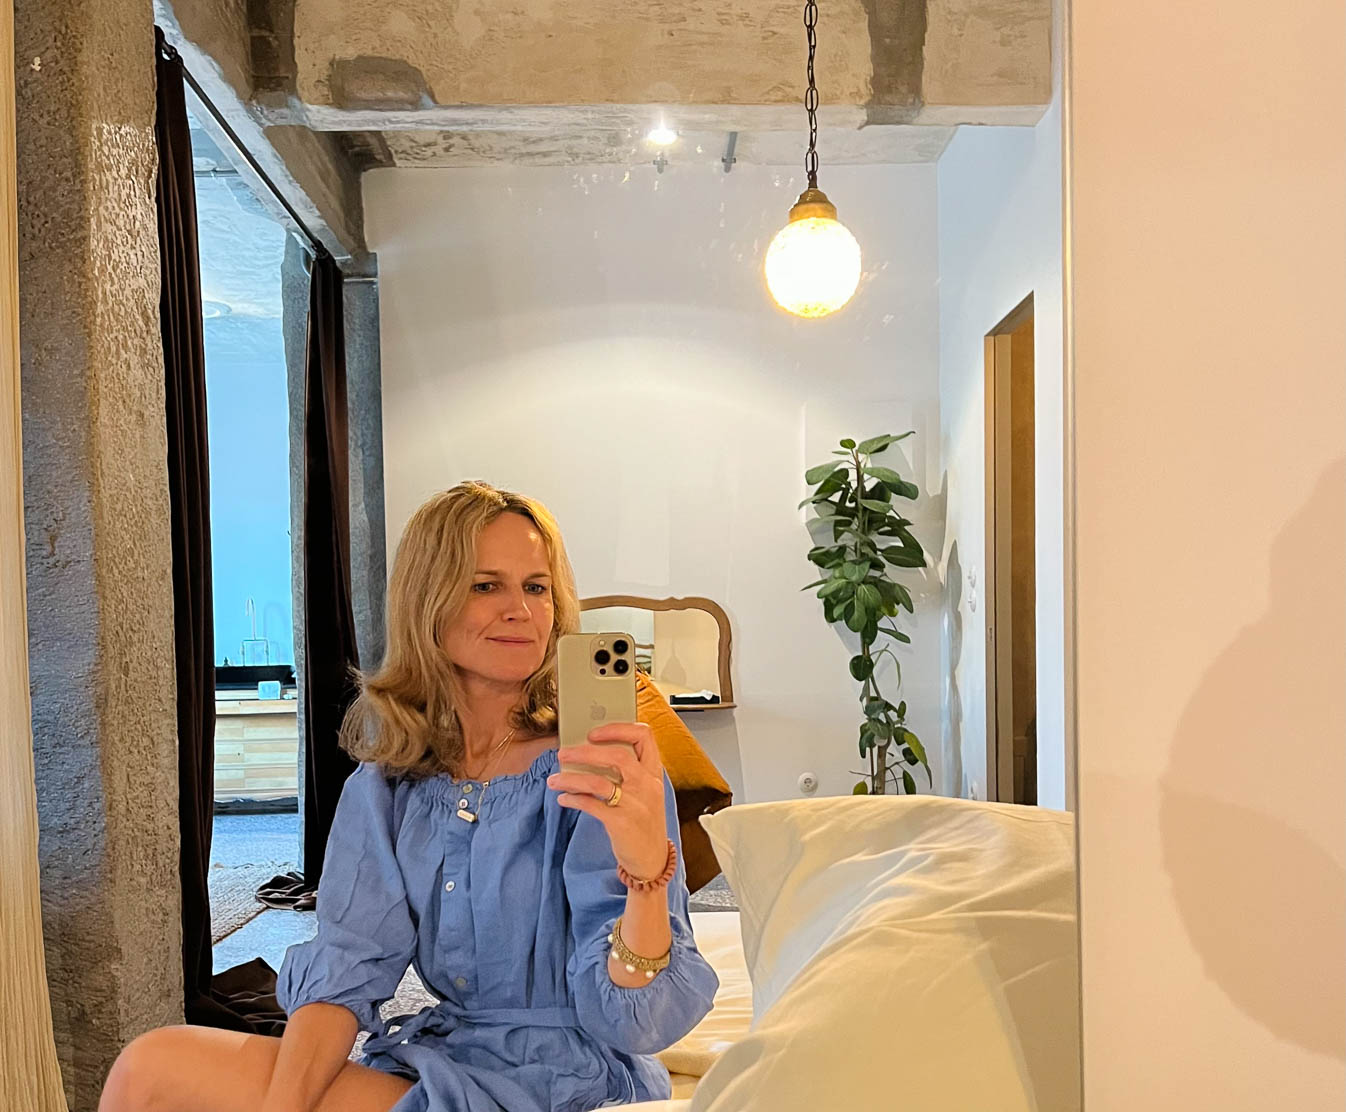 Mona Me in my bedroom. Simplicity is considered the ultimate sophistication at Mona, and this is reflected in everything they do — from their approach to hospitality to how they design spaces and enable ways of being. A commitment to the art of living